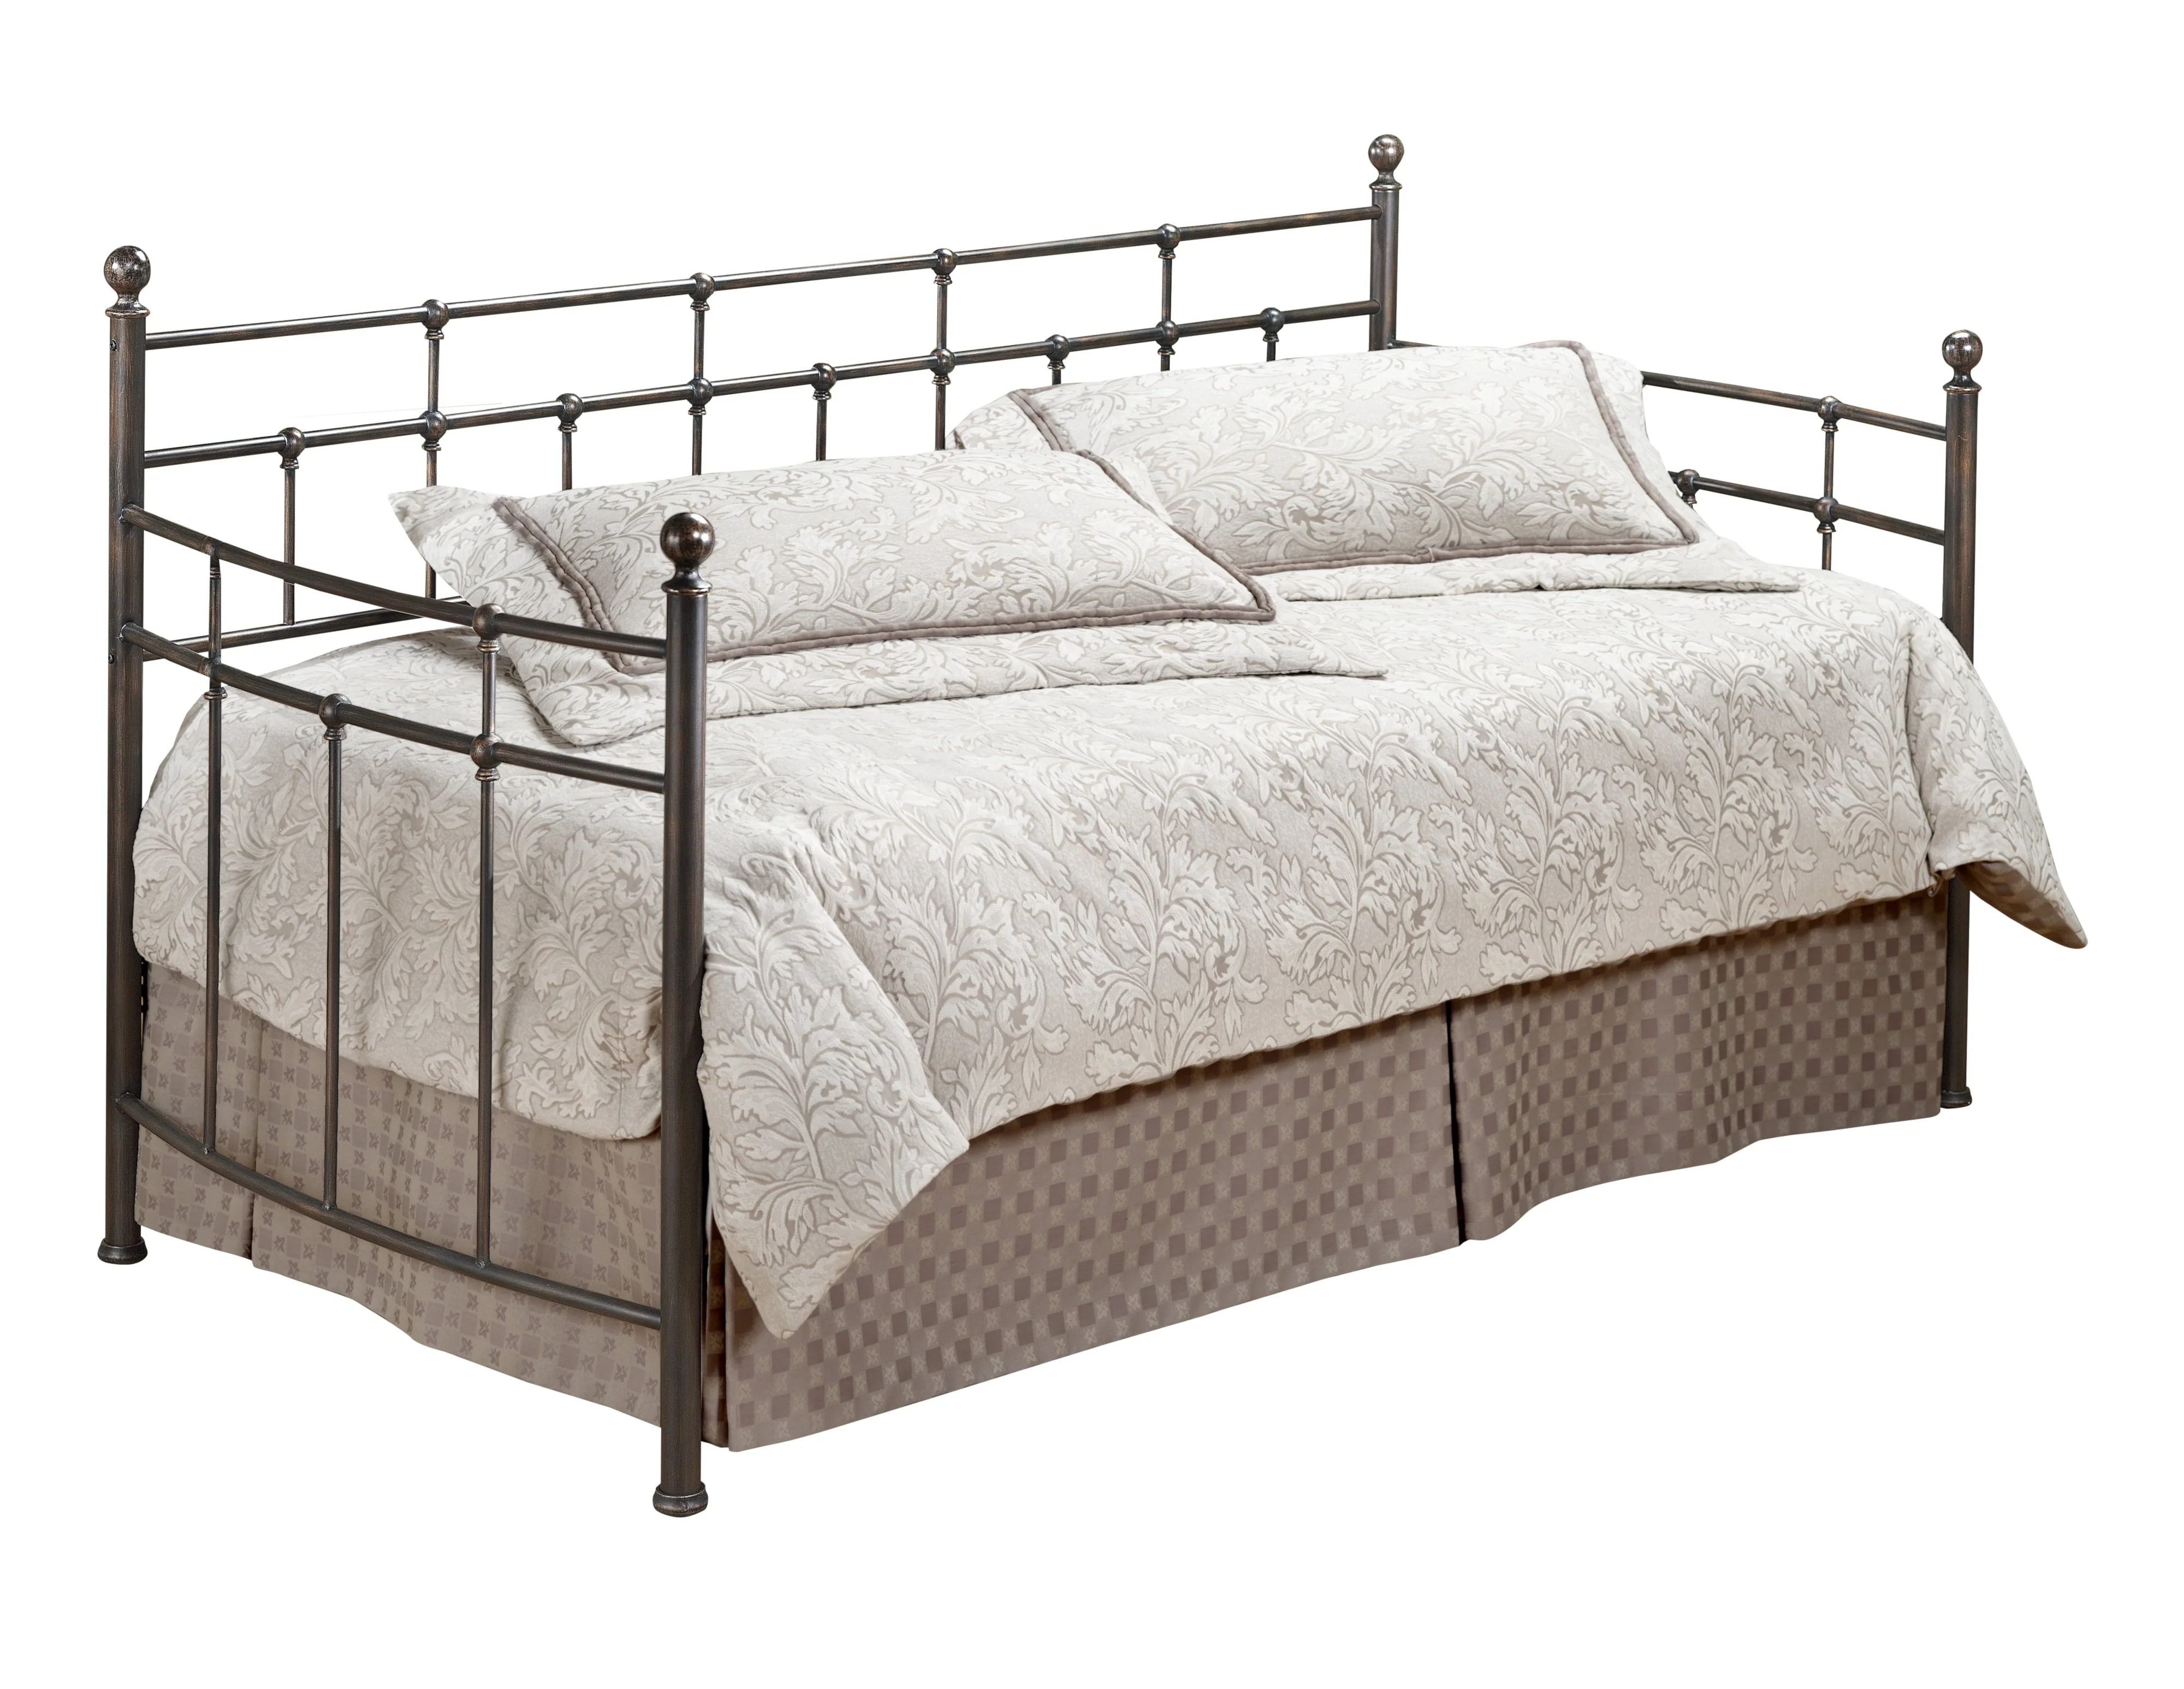 Hillsdale Providence Providence Metal Twin Daybed With Spindle Design A1 Furniture And Mattress